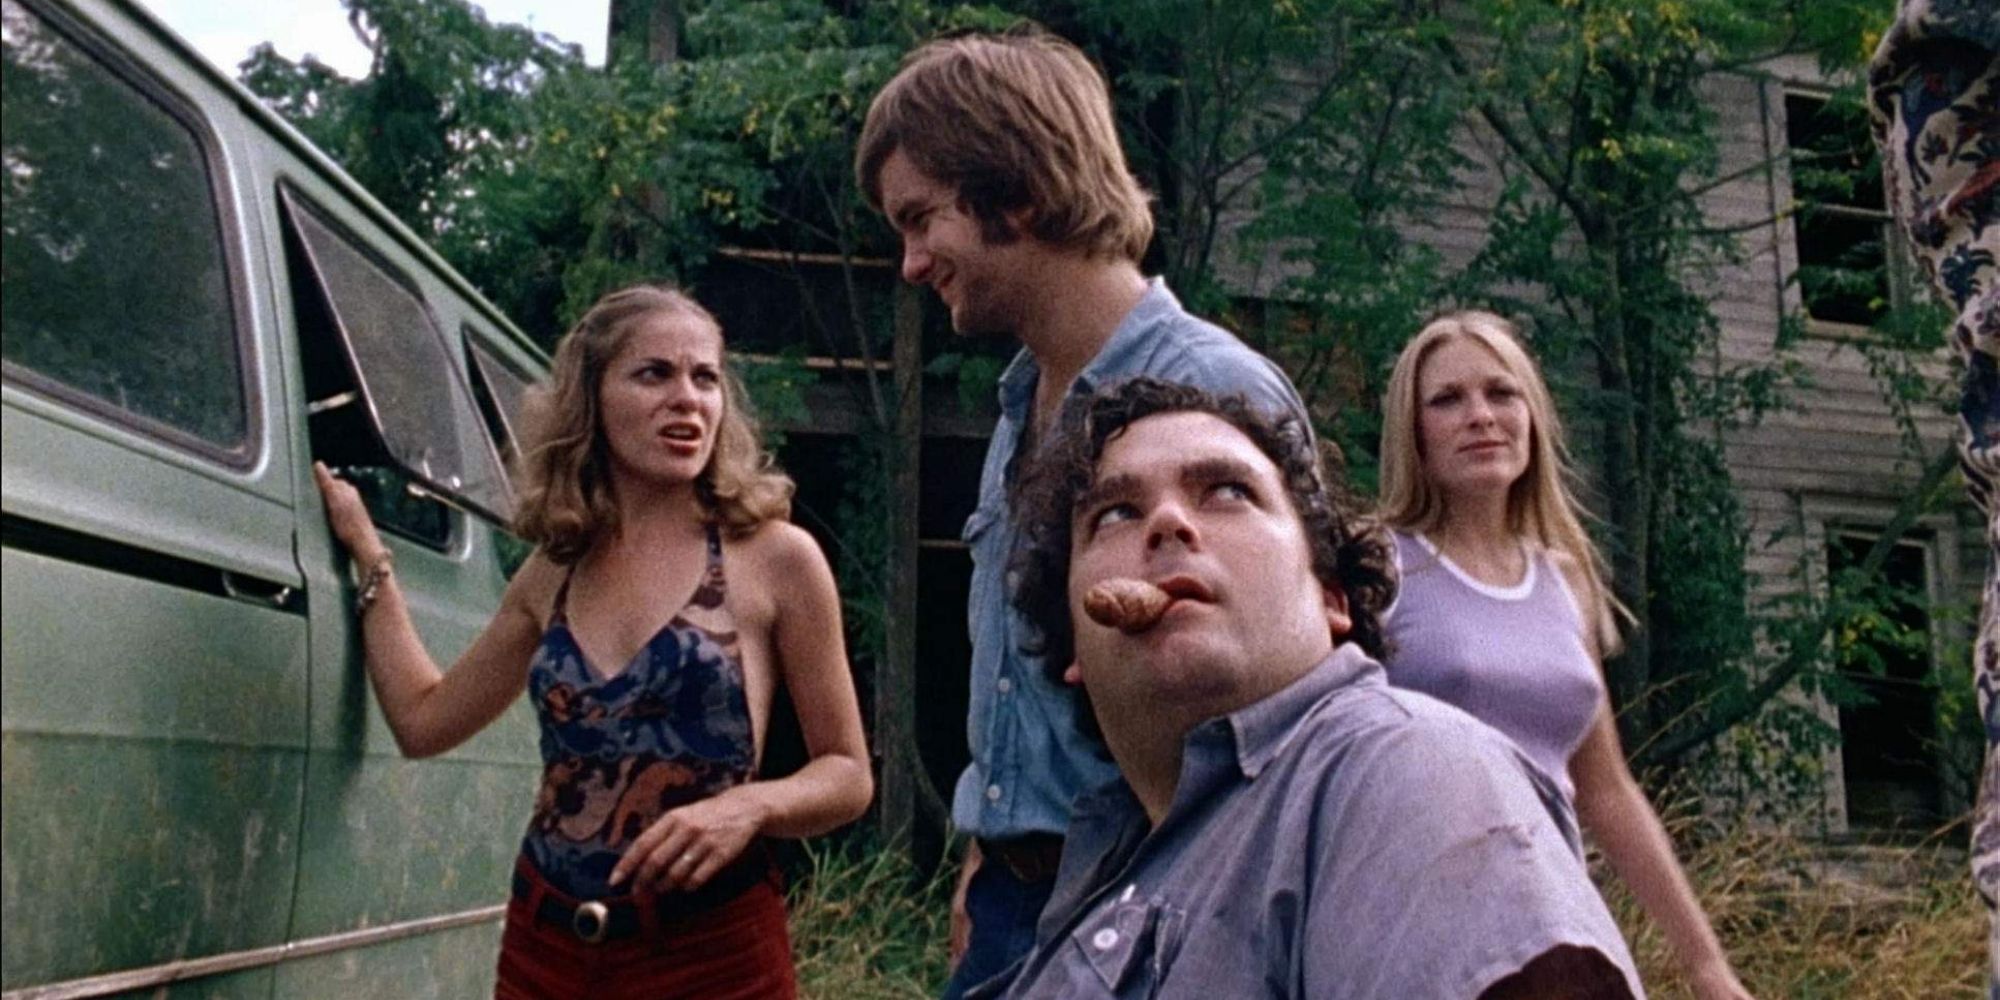 Sally, Franklin, and two other characters from The Texas Chain Saw Massacre